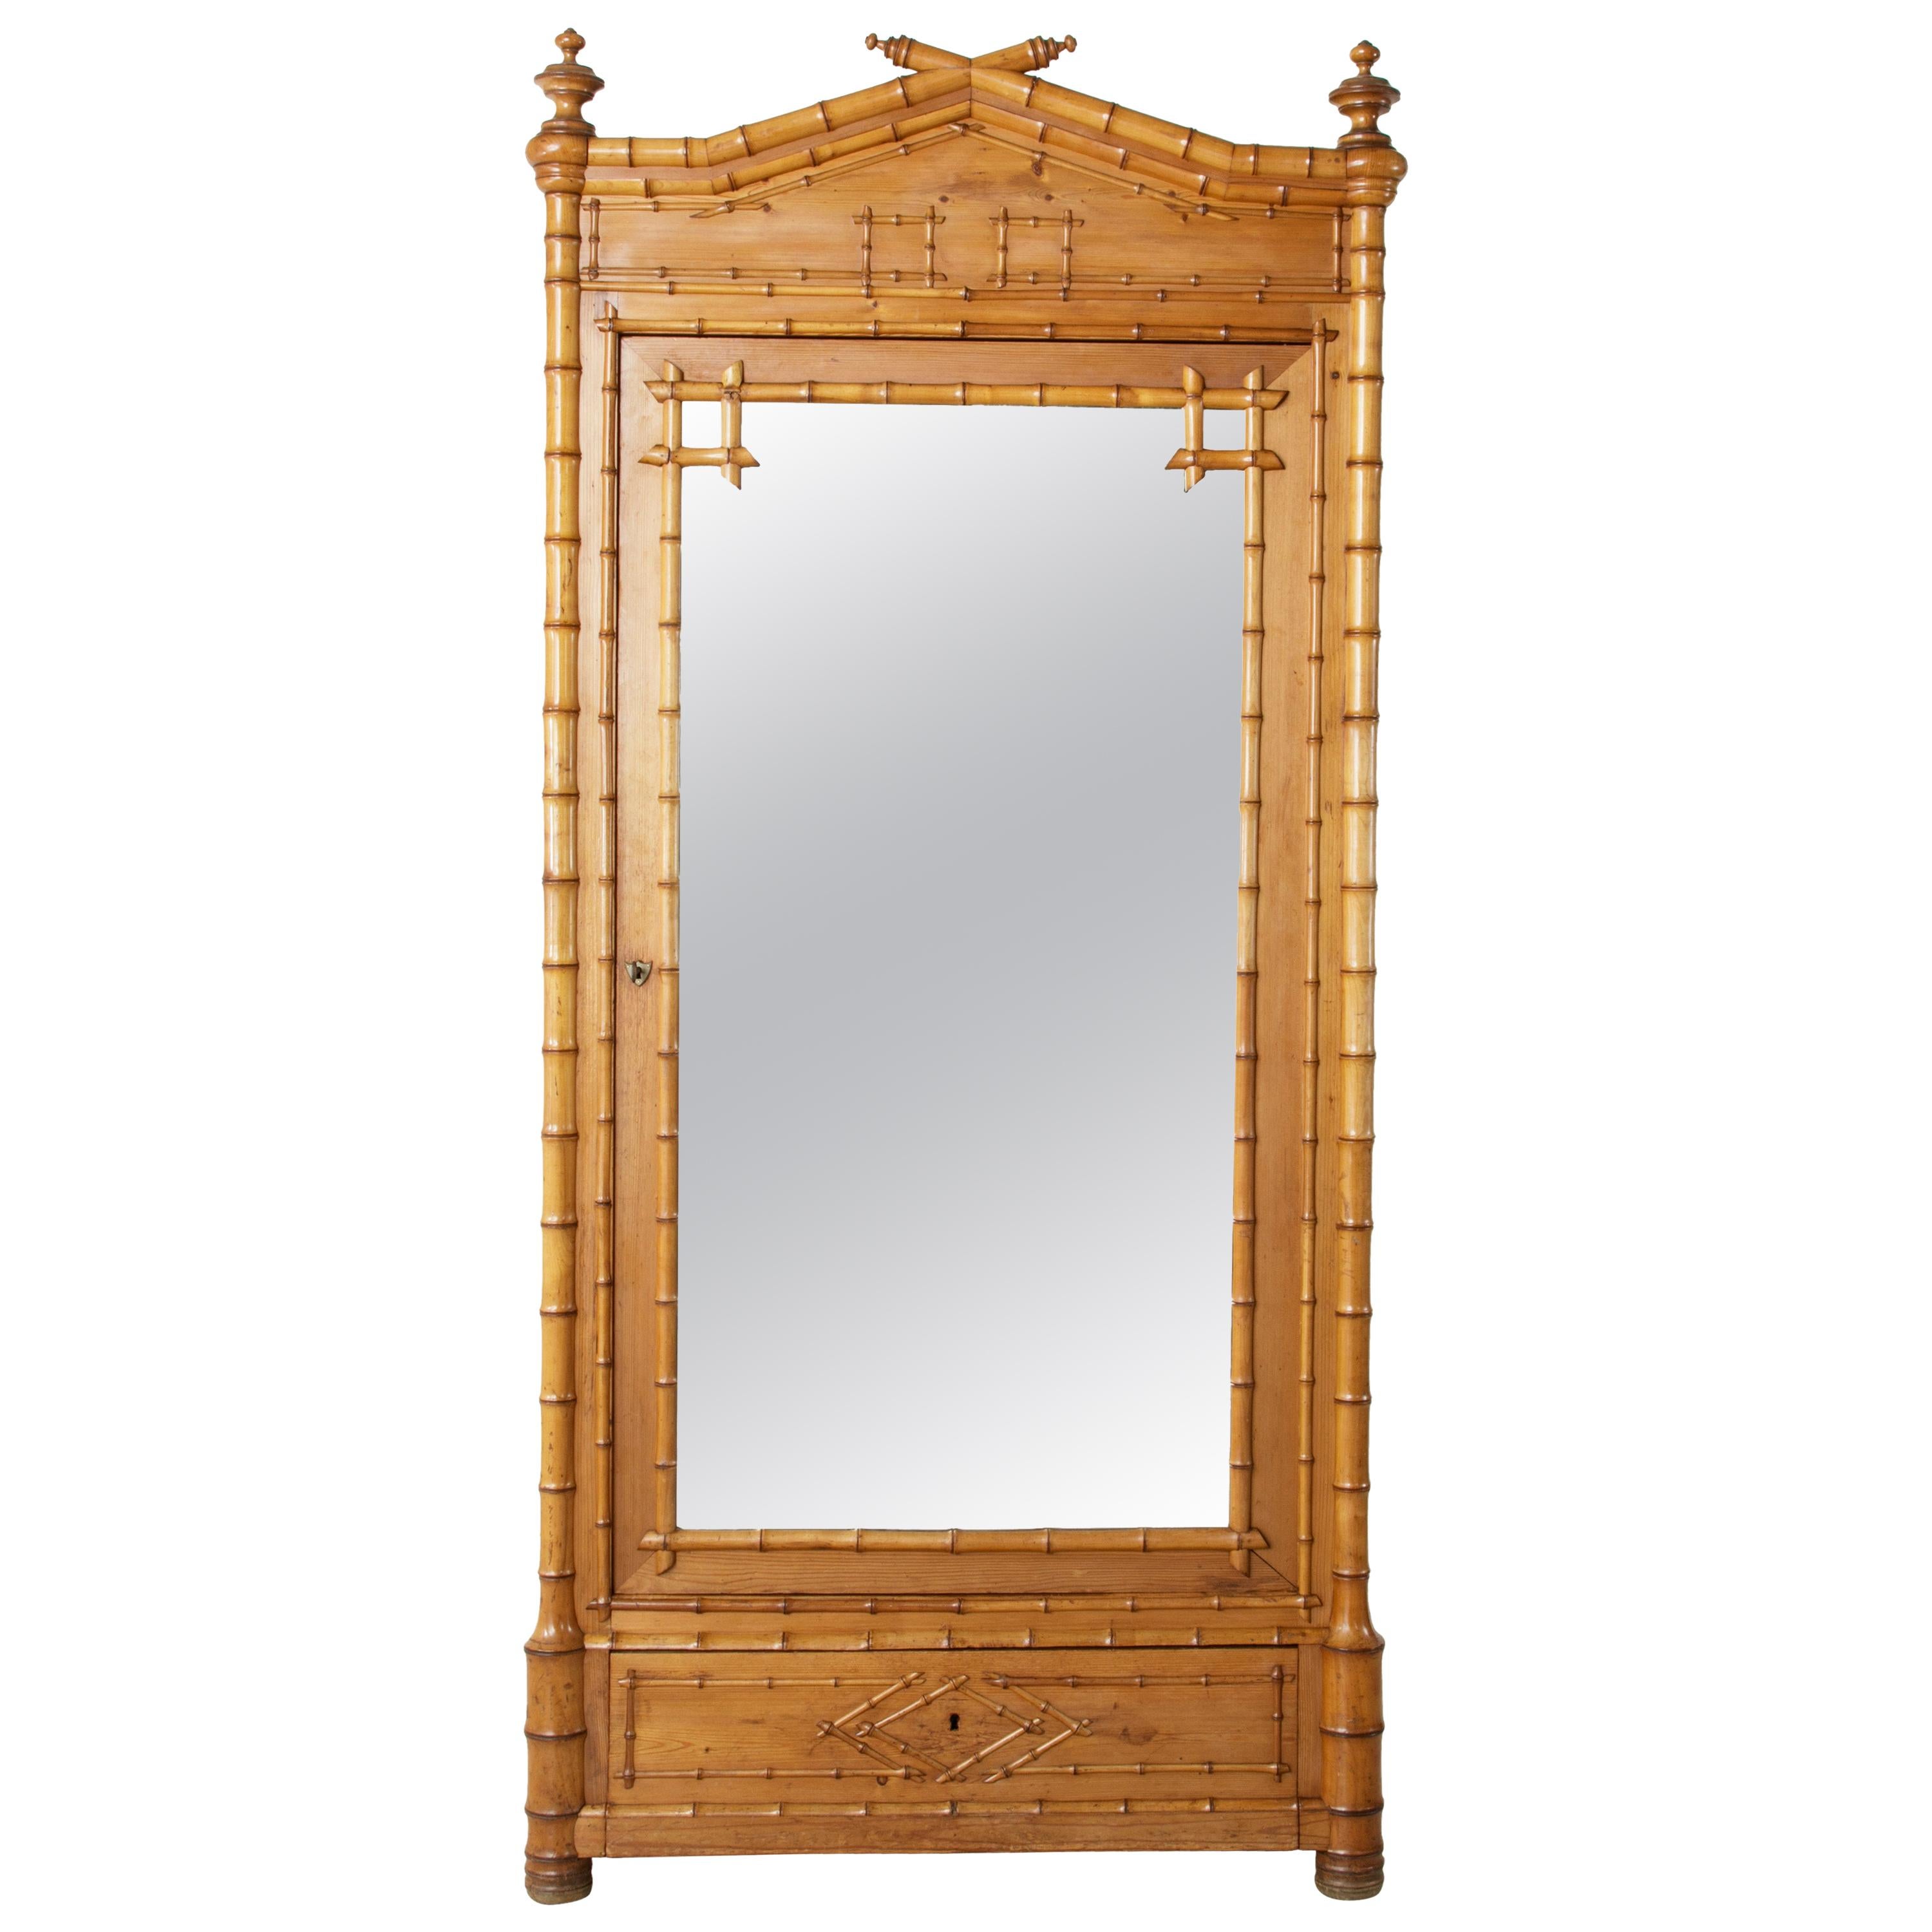 French Faux Bamboo Armoire with Mirror circa 1900, Cherry and Heartwood Pine